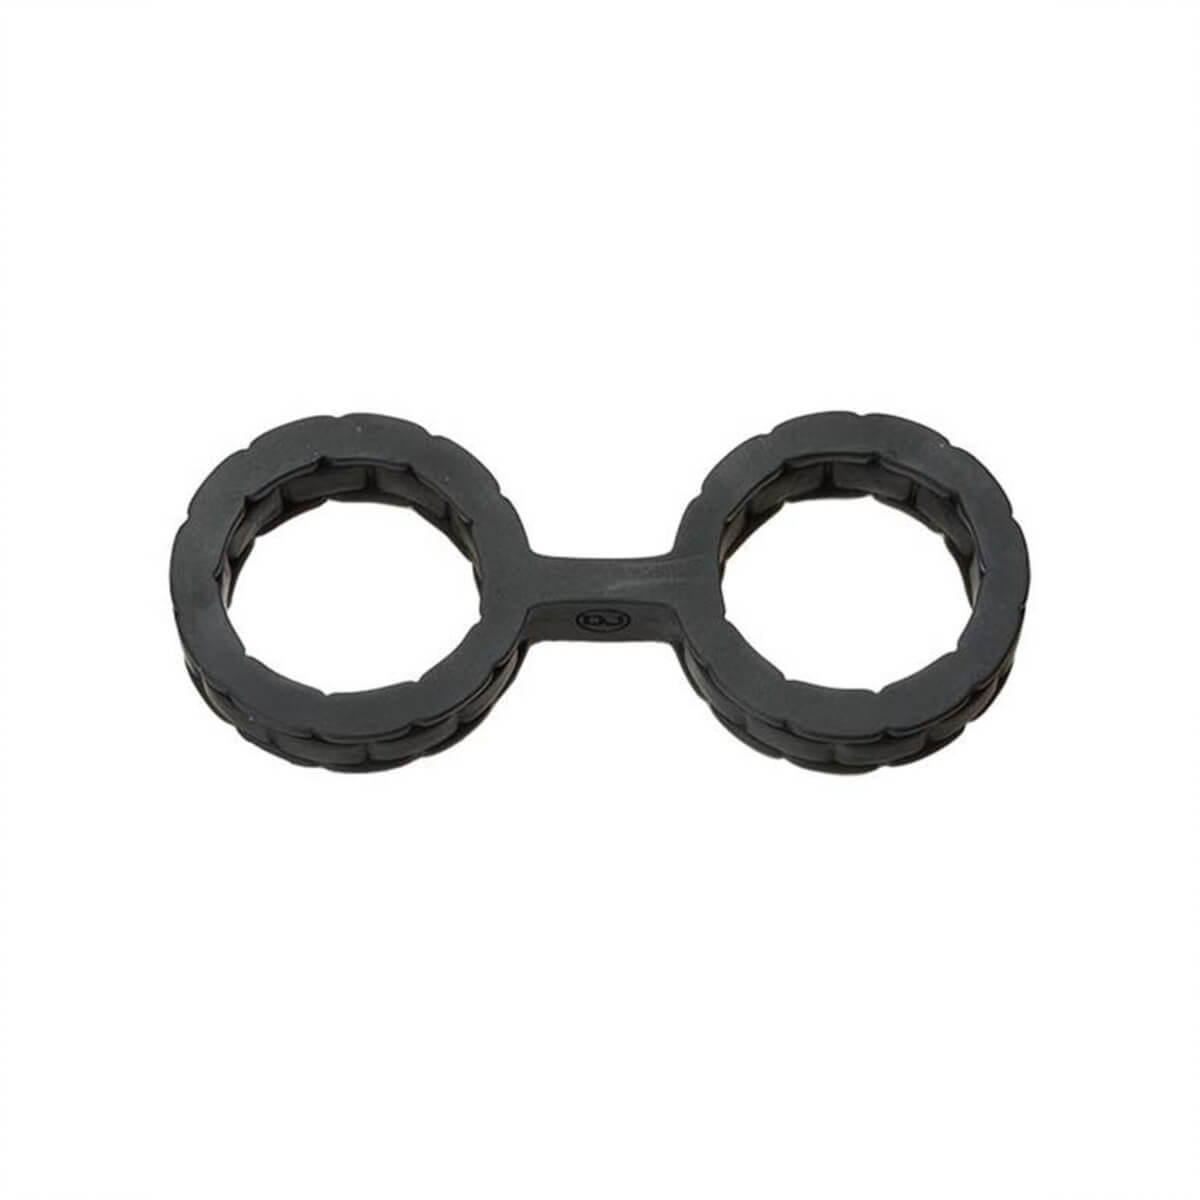 Black textured silicone cuffs for bondage play Nudie Co